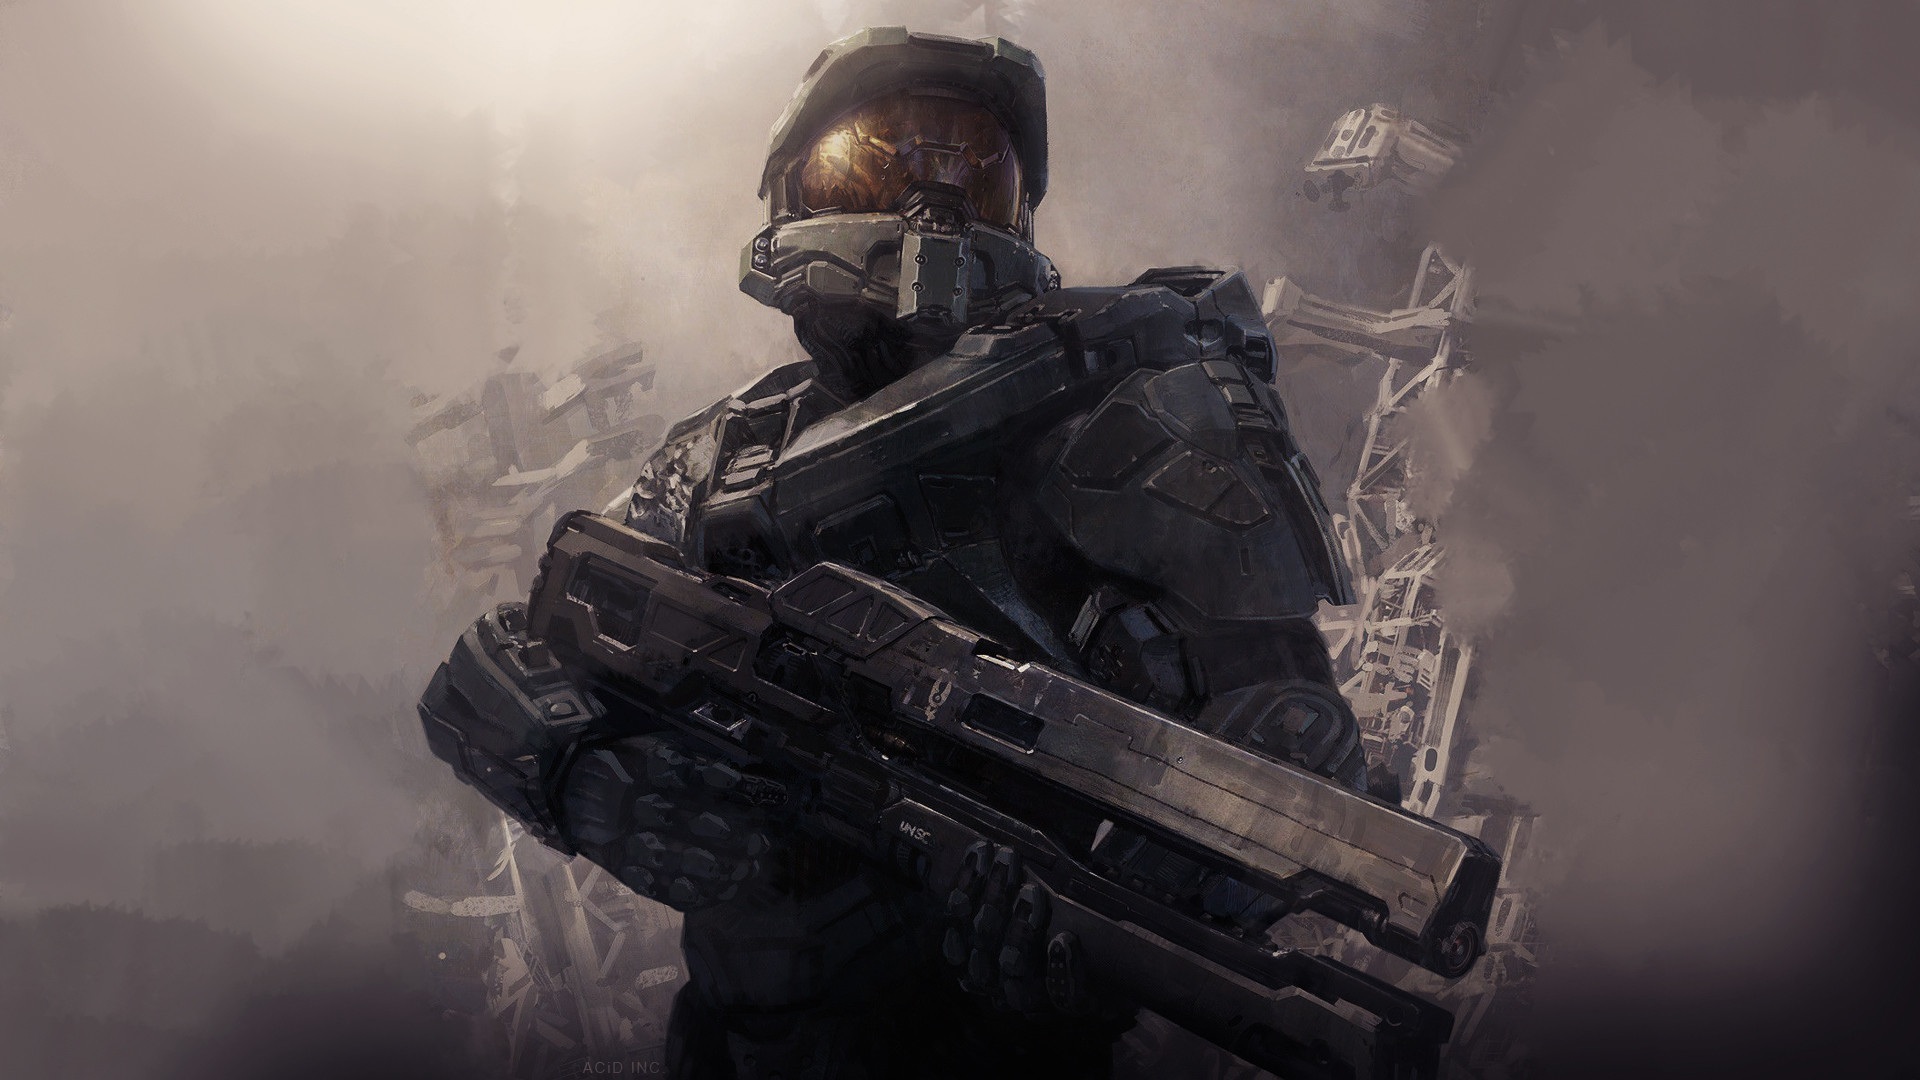 1920x1080 Halo 4 HD Wallpaper | Background Image |  | ID:393919 - Wallpaper  Abyss